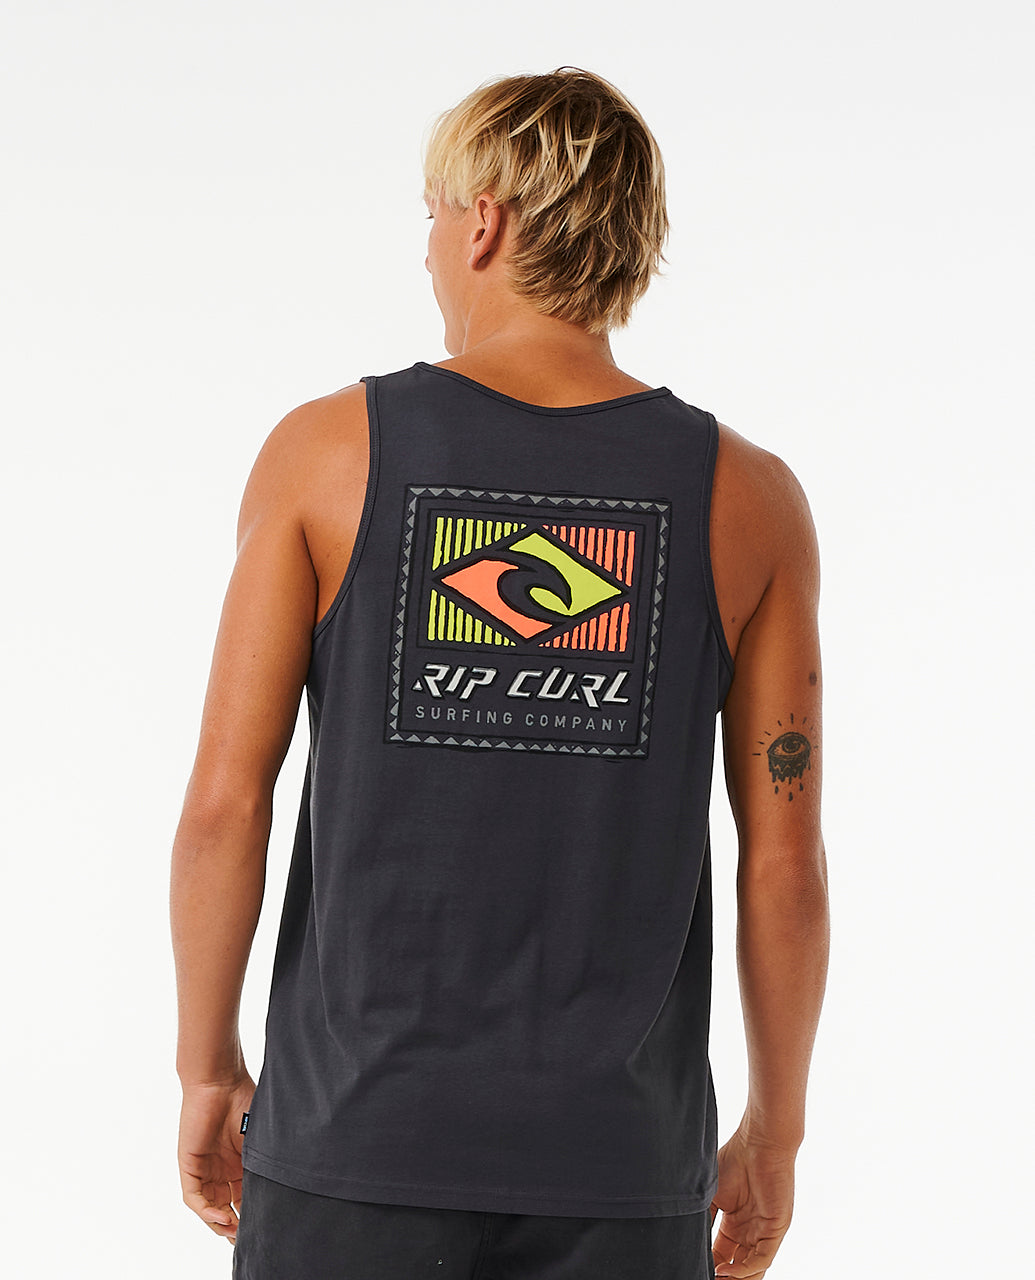 TRADITIONS TANK